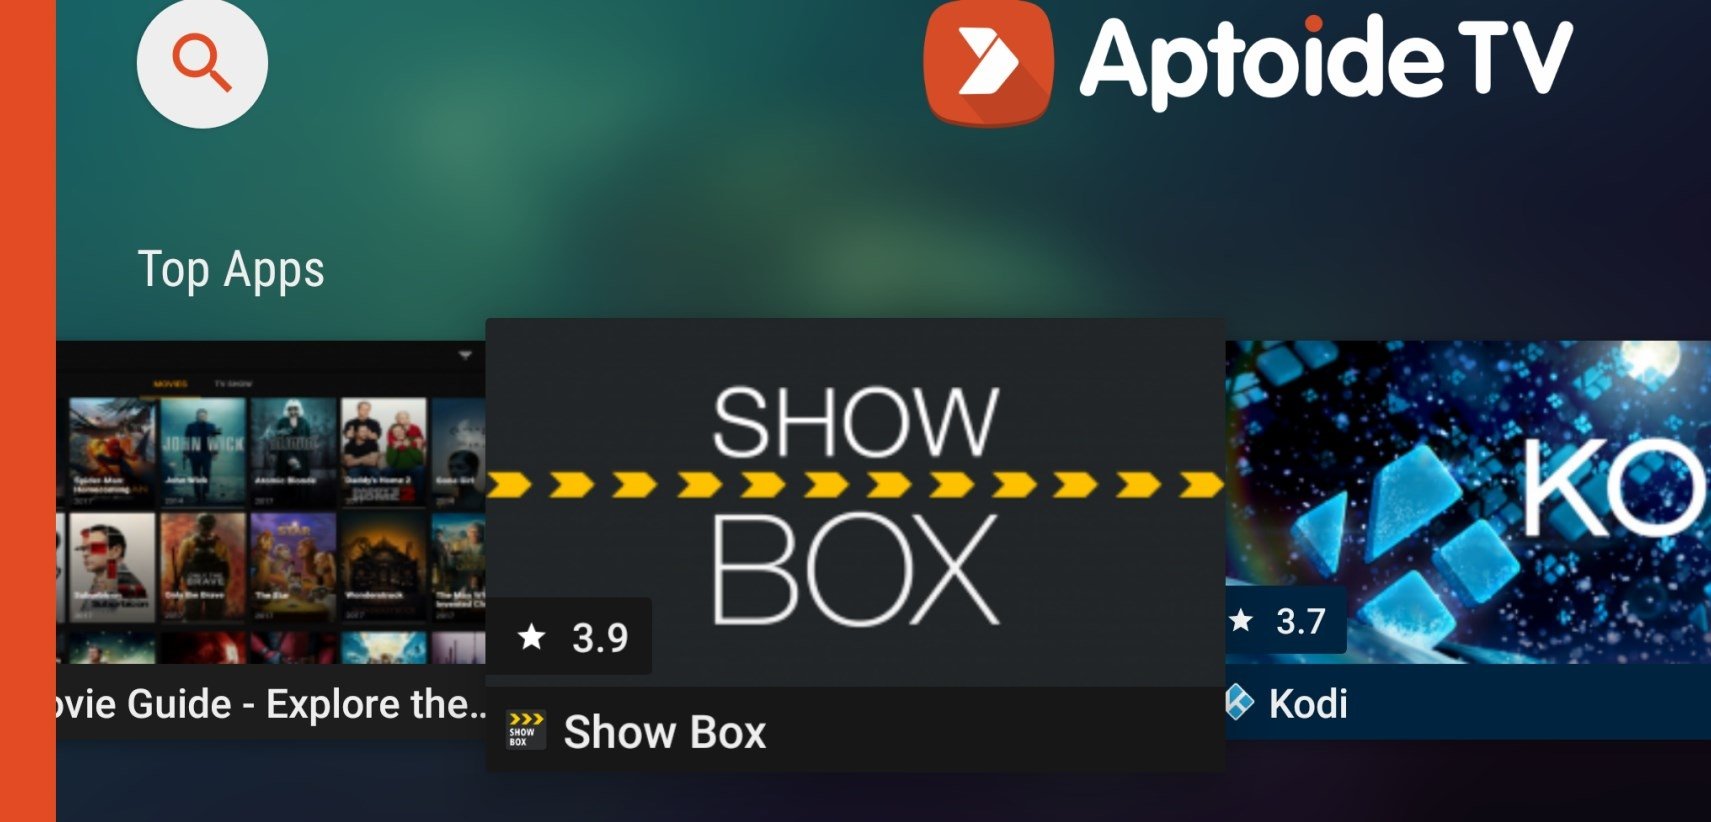 Tv apkpure for box android m.tonton.com.my: Android